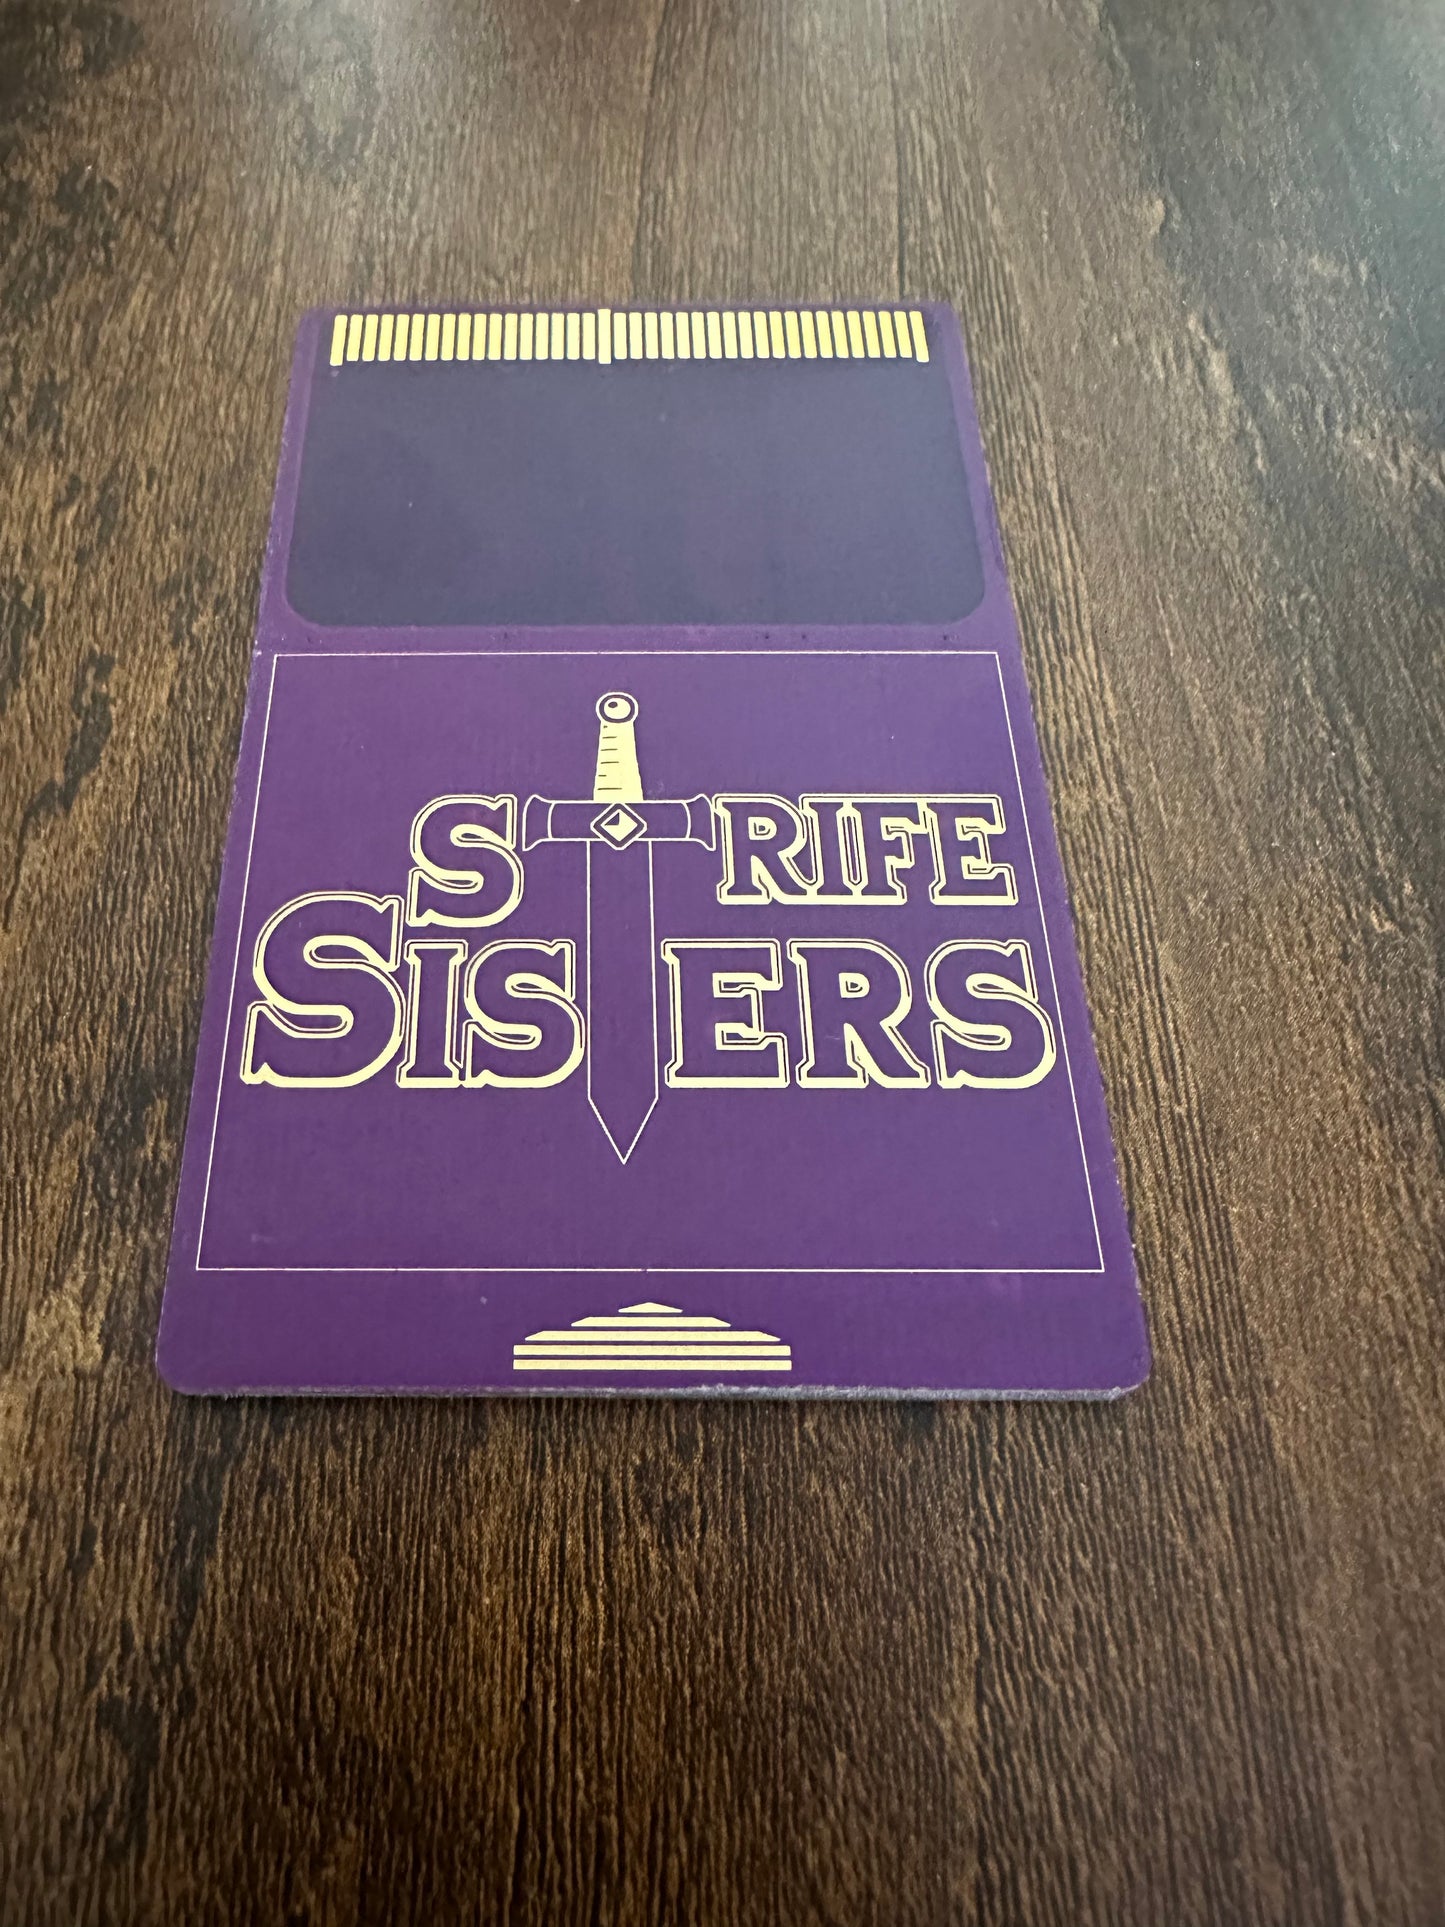 Strife Sisters Video Game by Laconic Software for PC Engine or Turbografx 16